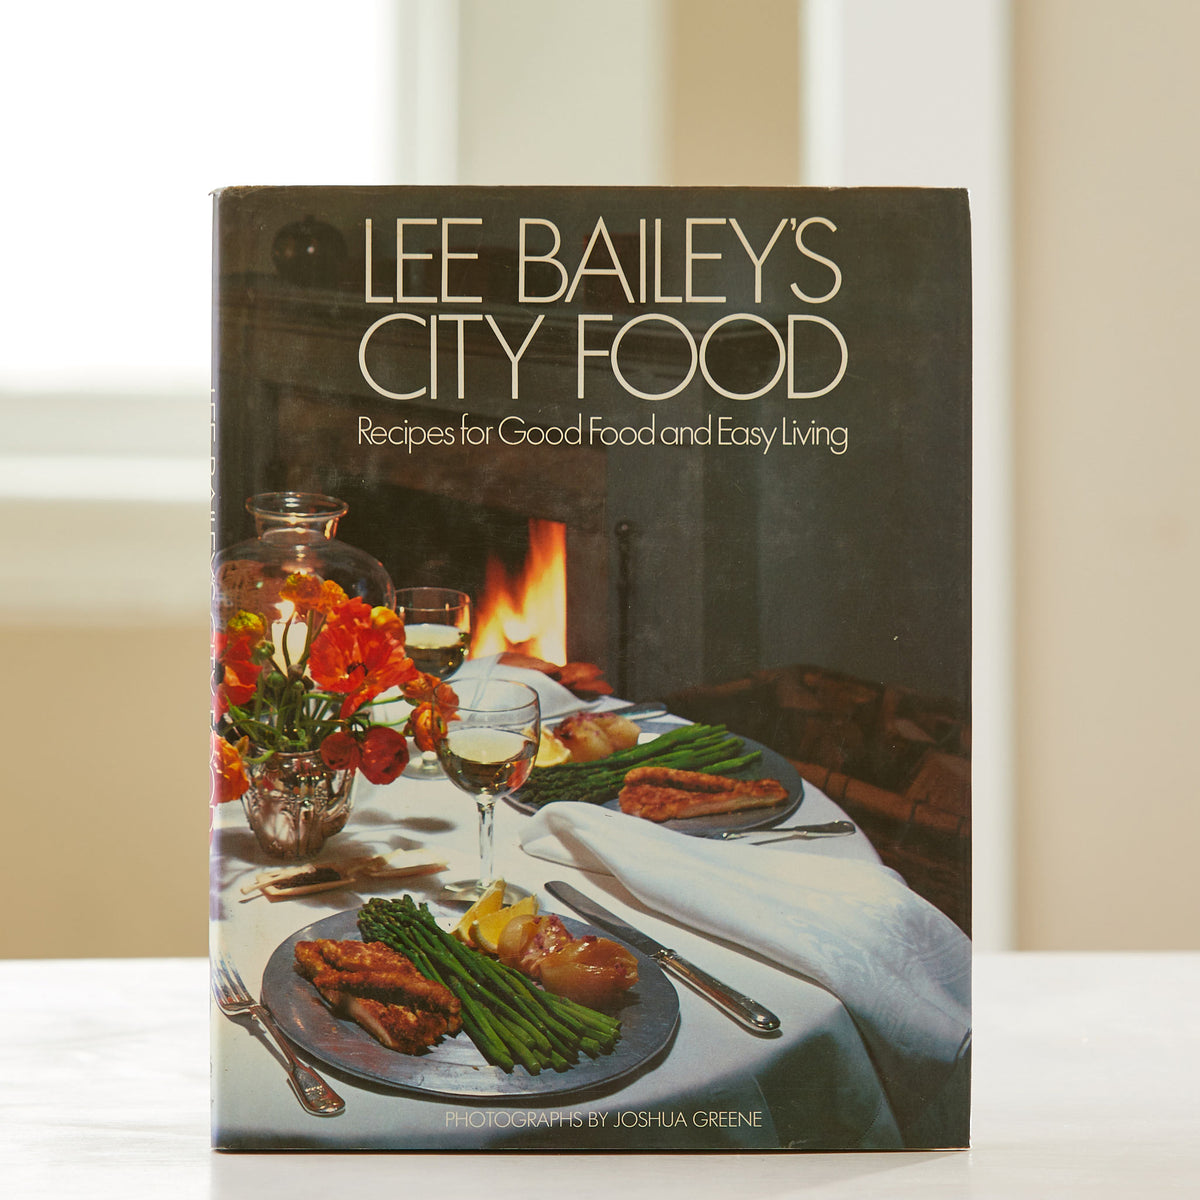 Lee Bailey’s City Foods Cookbook. Vintage cookbook for real tiny kitchens. The best apartment cookbook to prep a romantic picnic lunch in the park.